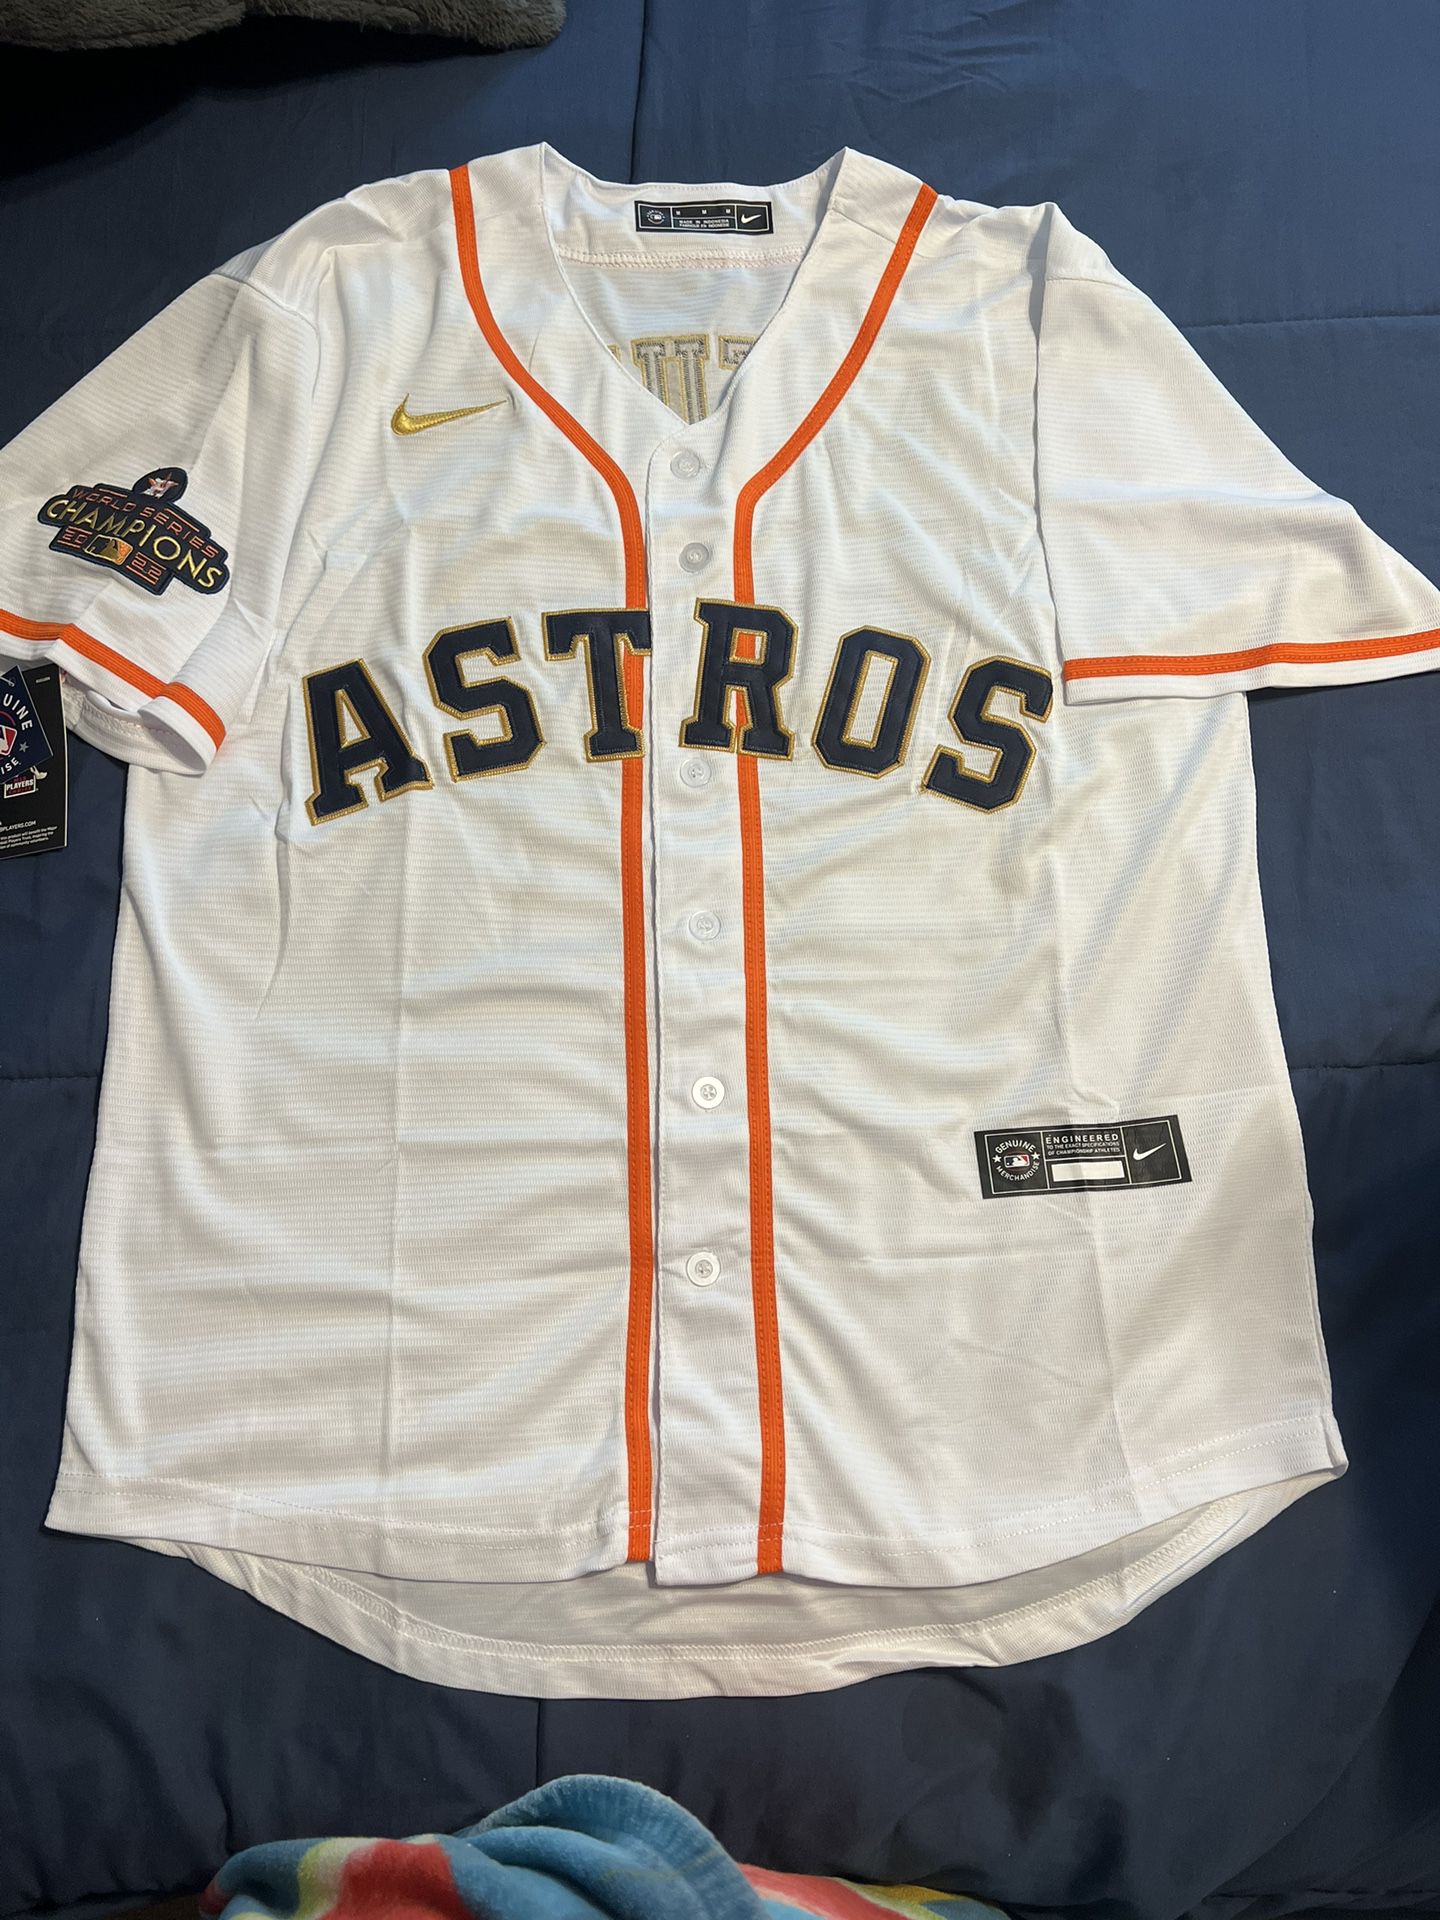 astros gold jersey